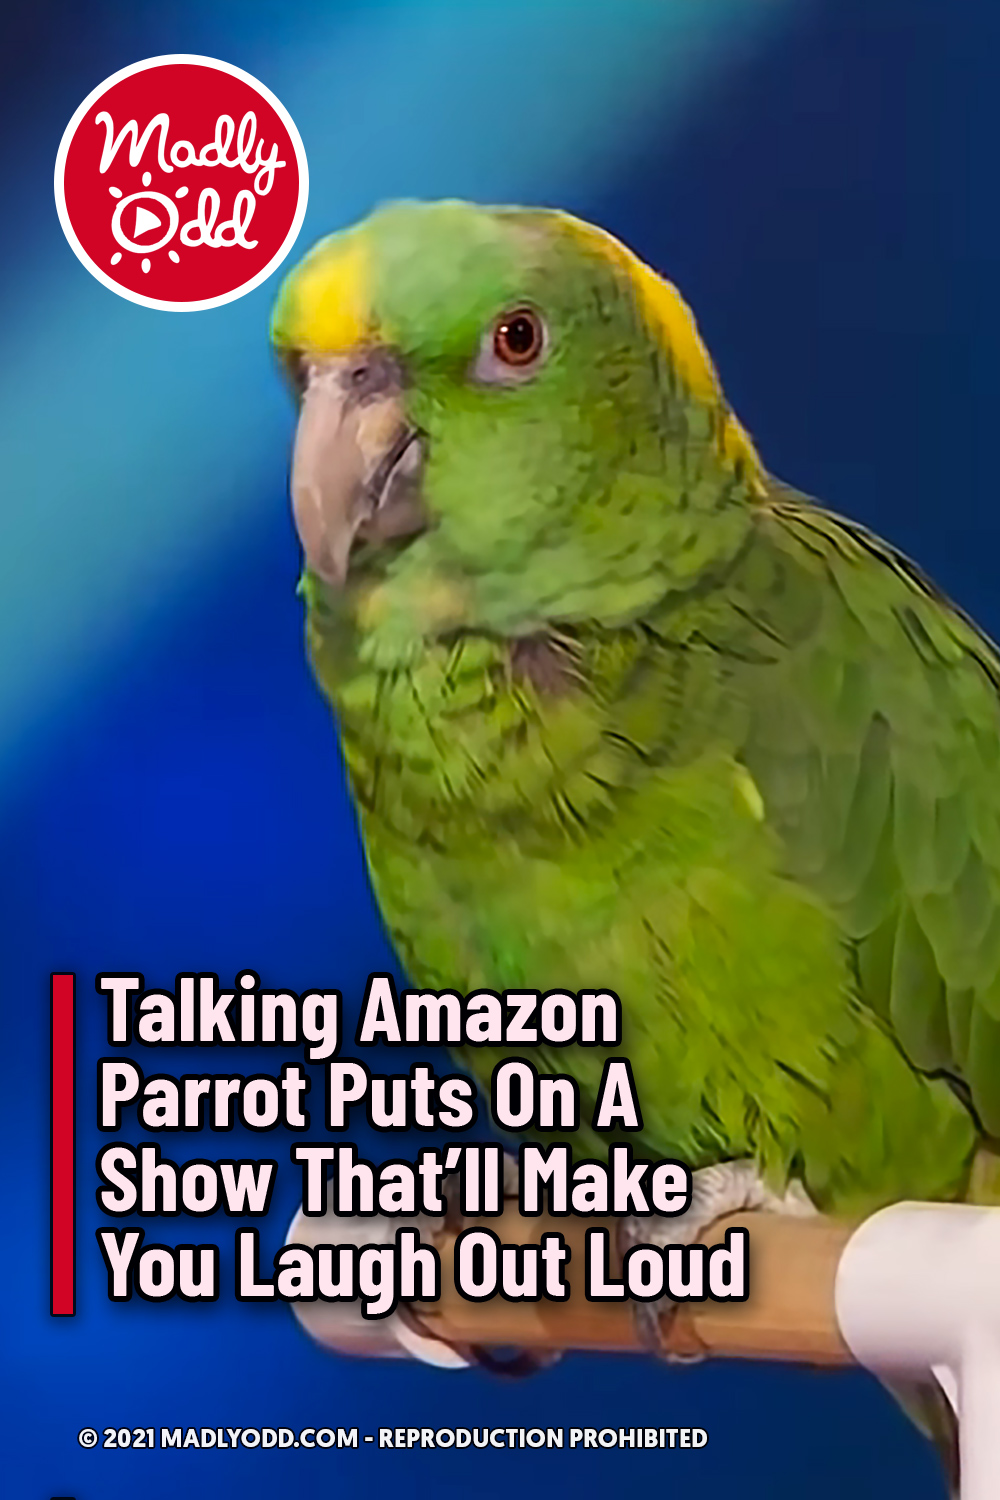 Talking Amazon Parrot Puts On A Show That’ll Make You Laugh Out Loud